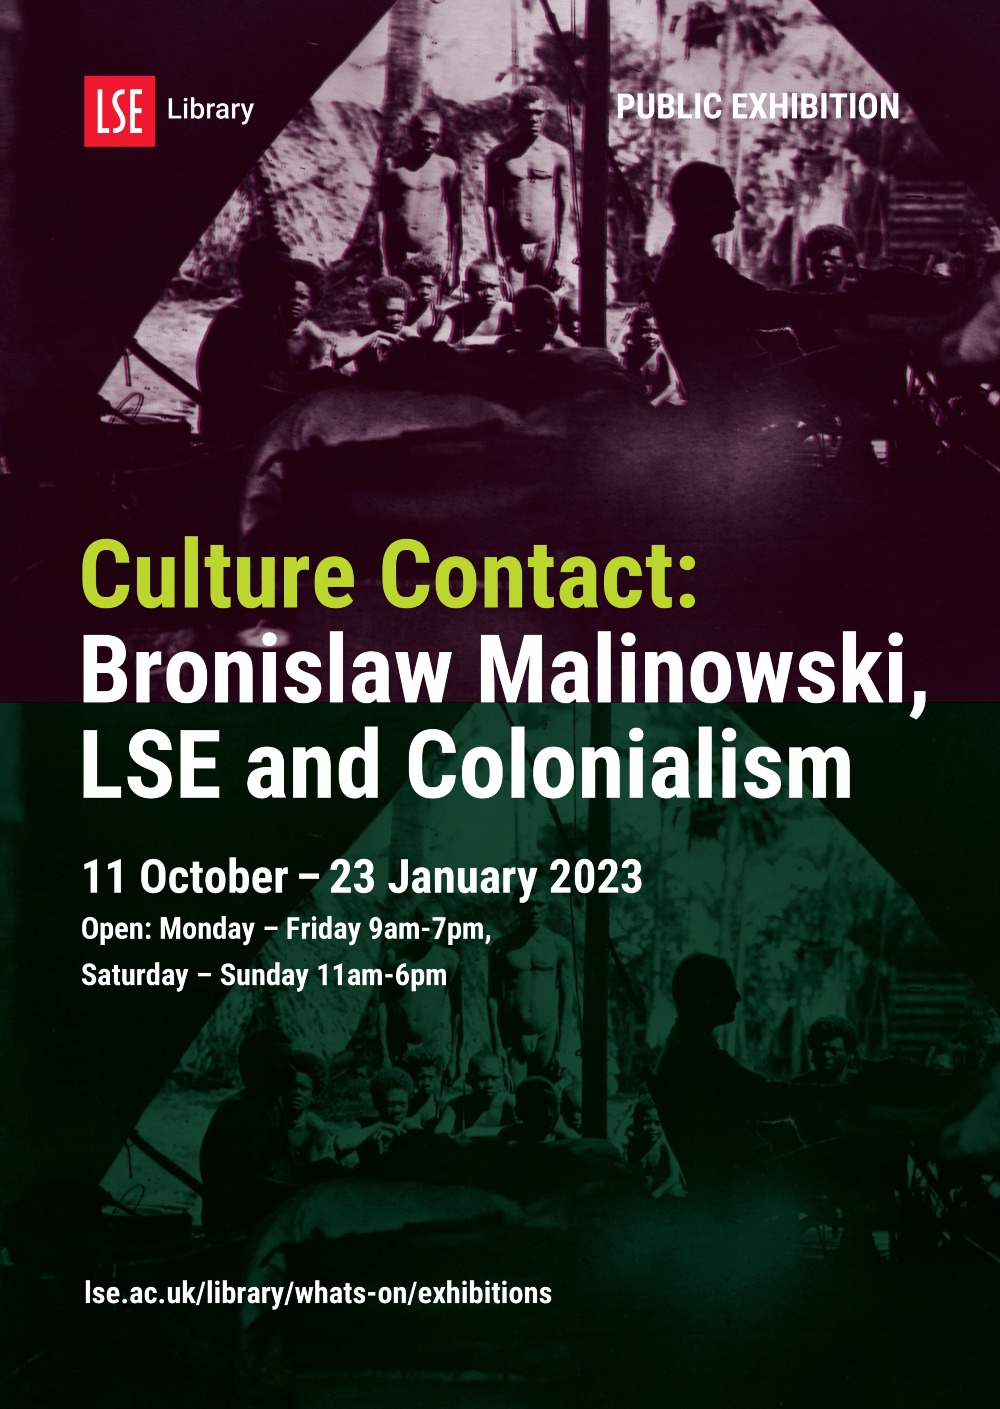 A poster advertising Culture Contact: Bronislaw Malinowski, LSE and Colonialism, an exhibition running at LSE Library 11 October until 23 January 2023.